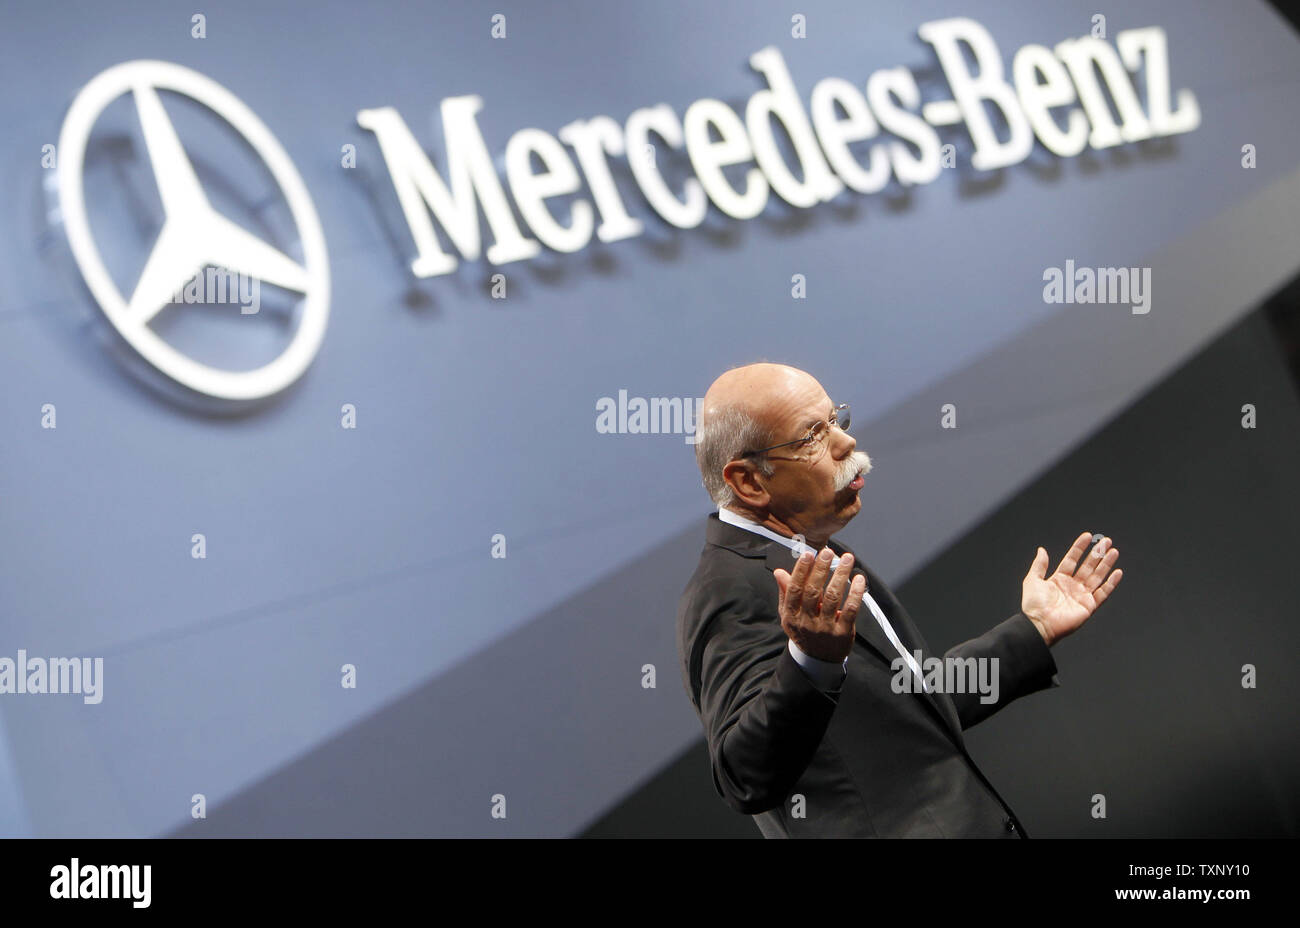 Dr. Dieter Zetsche, Chairman of the Board of Daimler introduces the new  Mercedes-Benz E-Class at the 2013 North American International Auto Show at the Cobo Center in Detroit, January 14, 2013. UPI/Mark Cowan Stock Photo